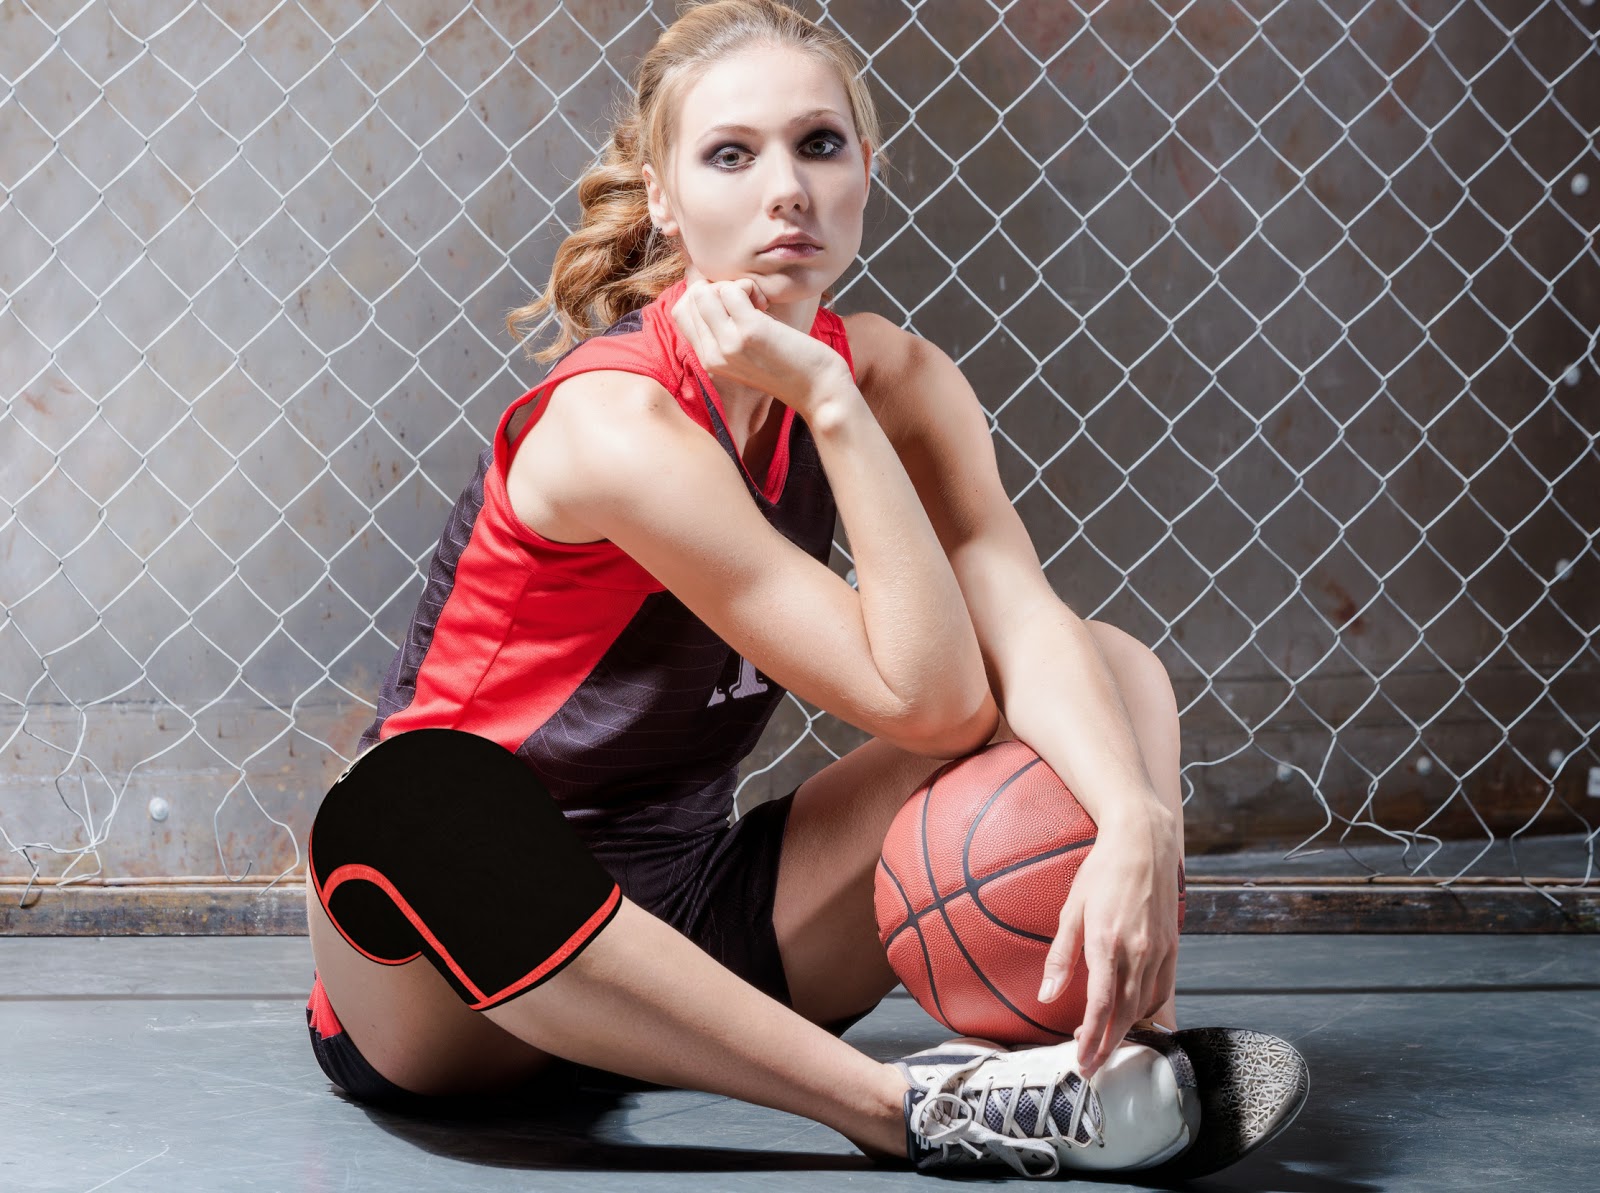 To wear or not to wear knee pads, sleeves or braces?